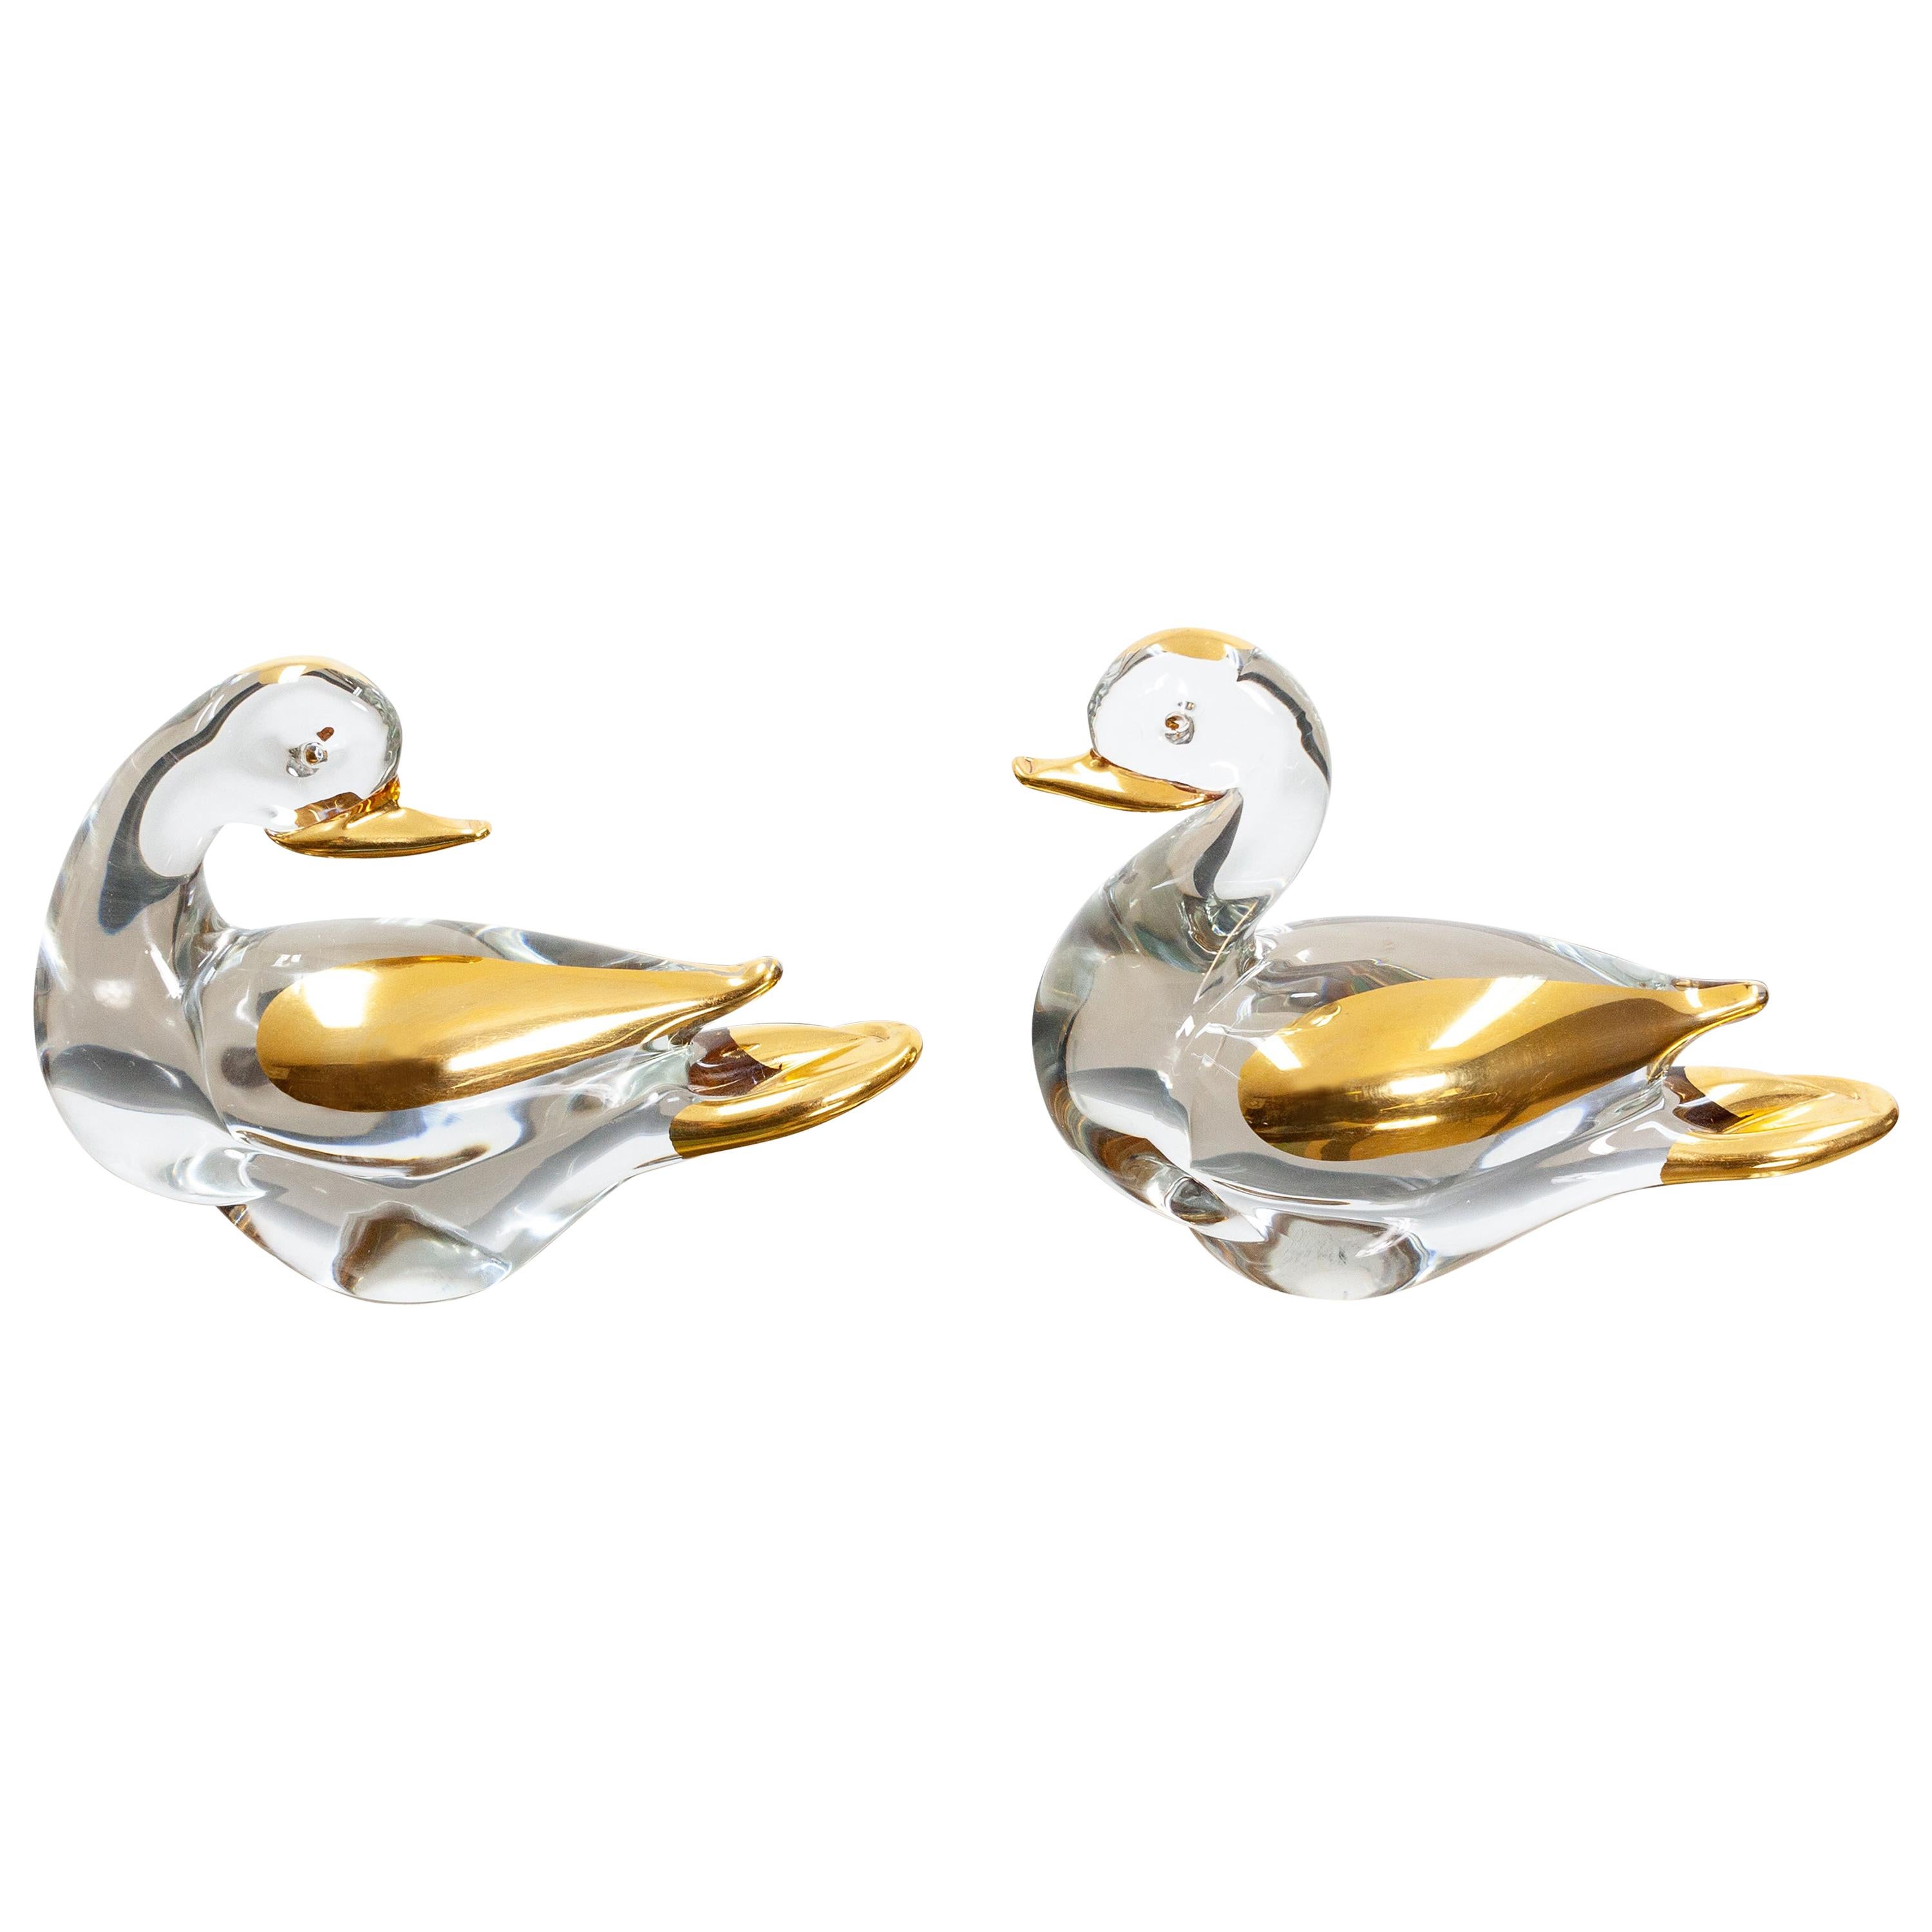 Two Murano Ducks Glass 24 Carat Gold, 1980s For Sale